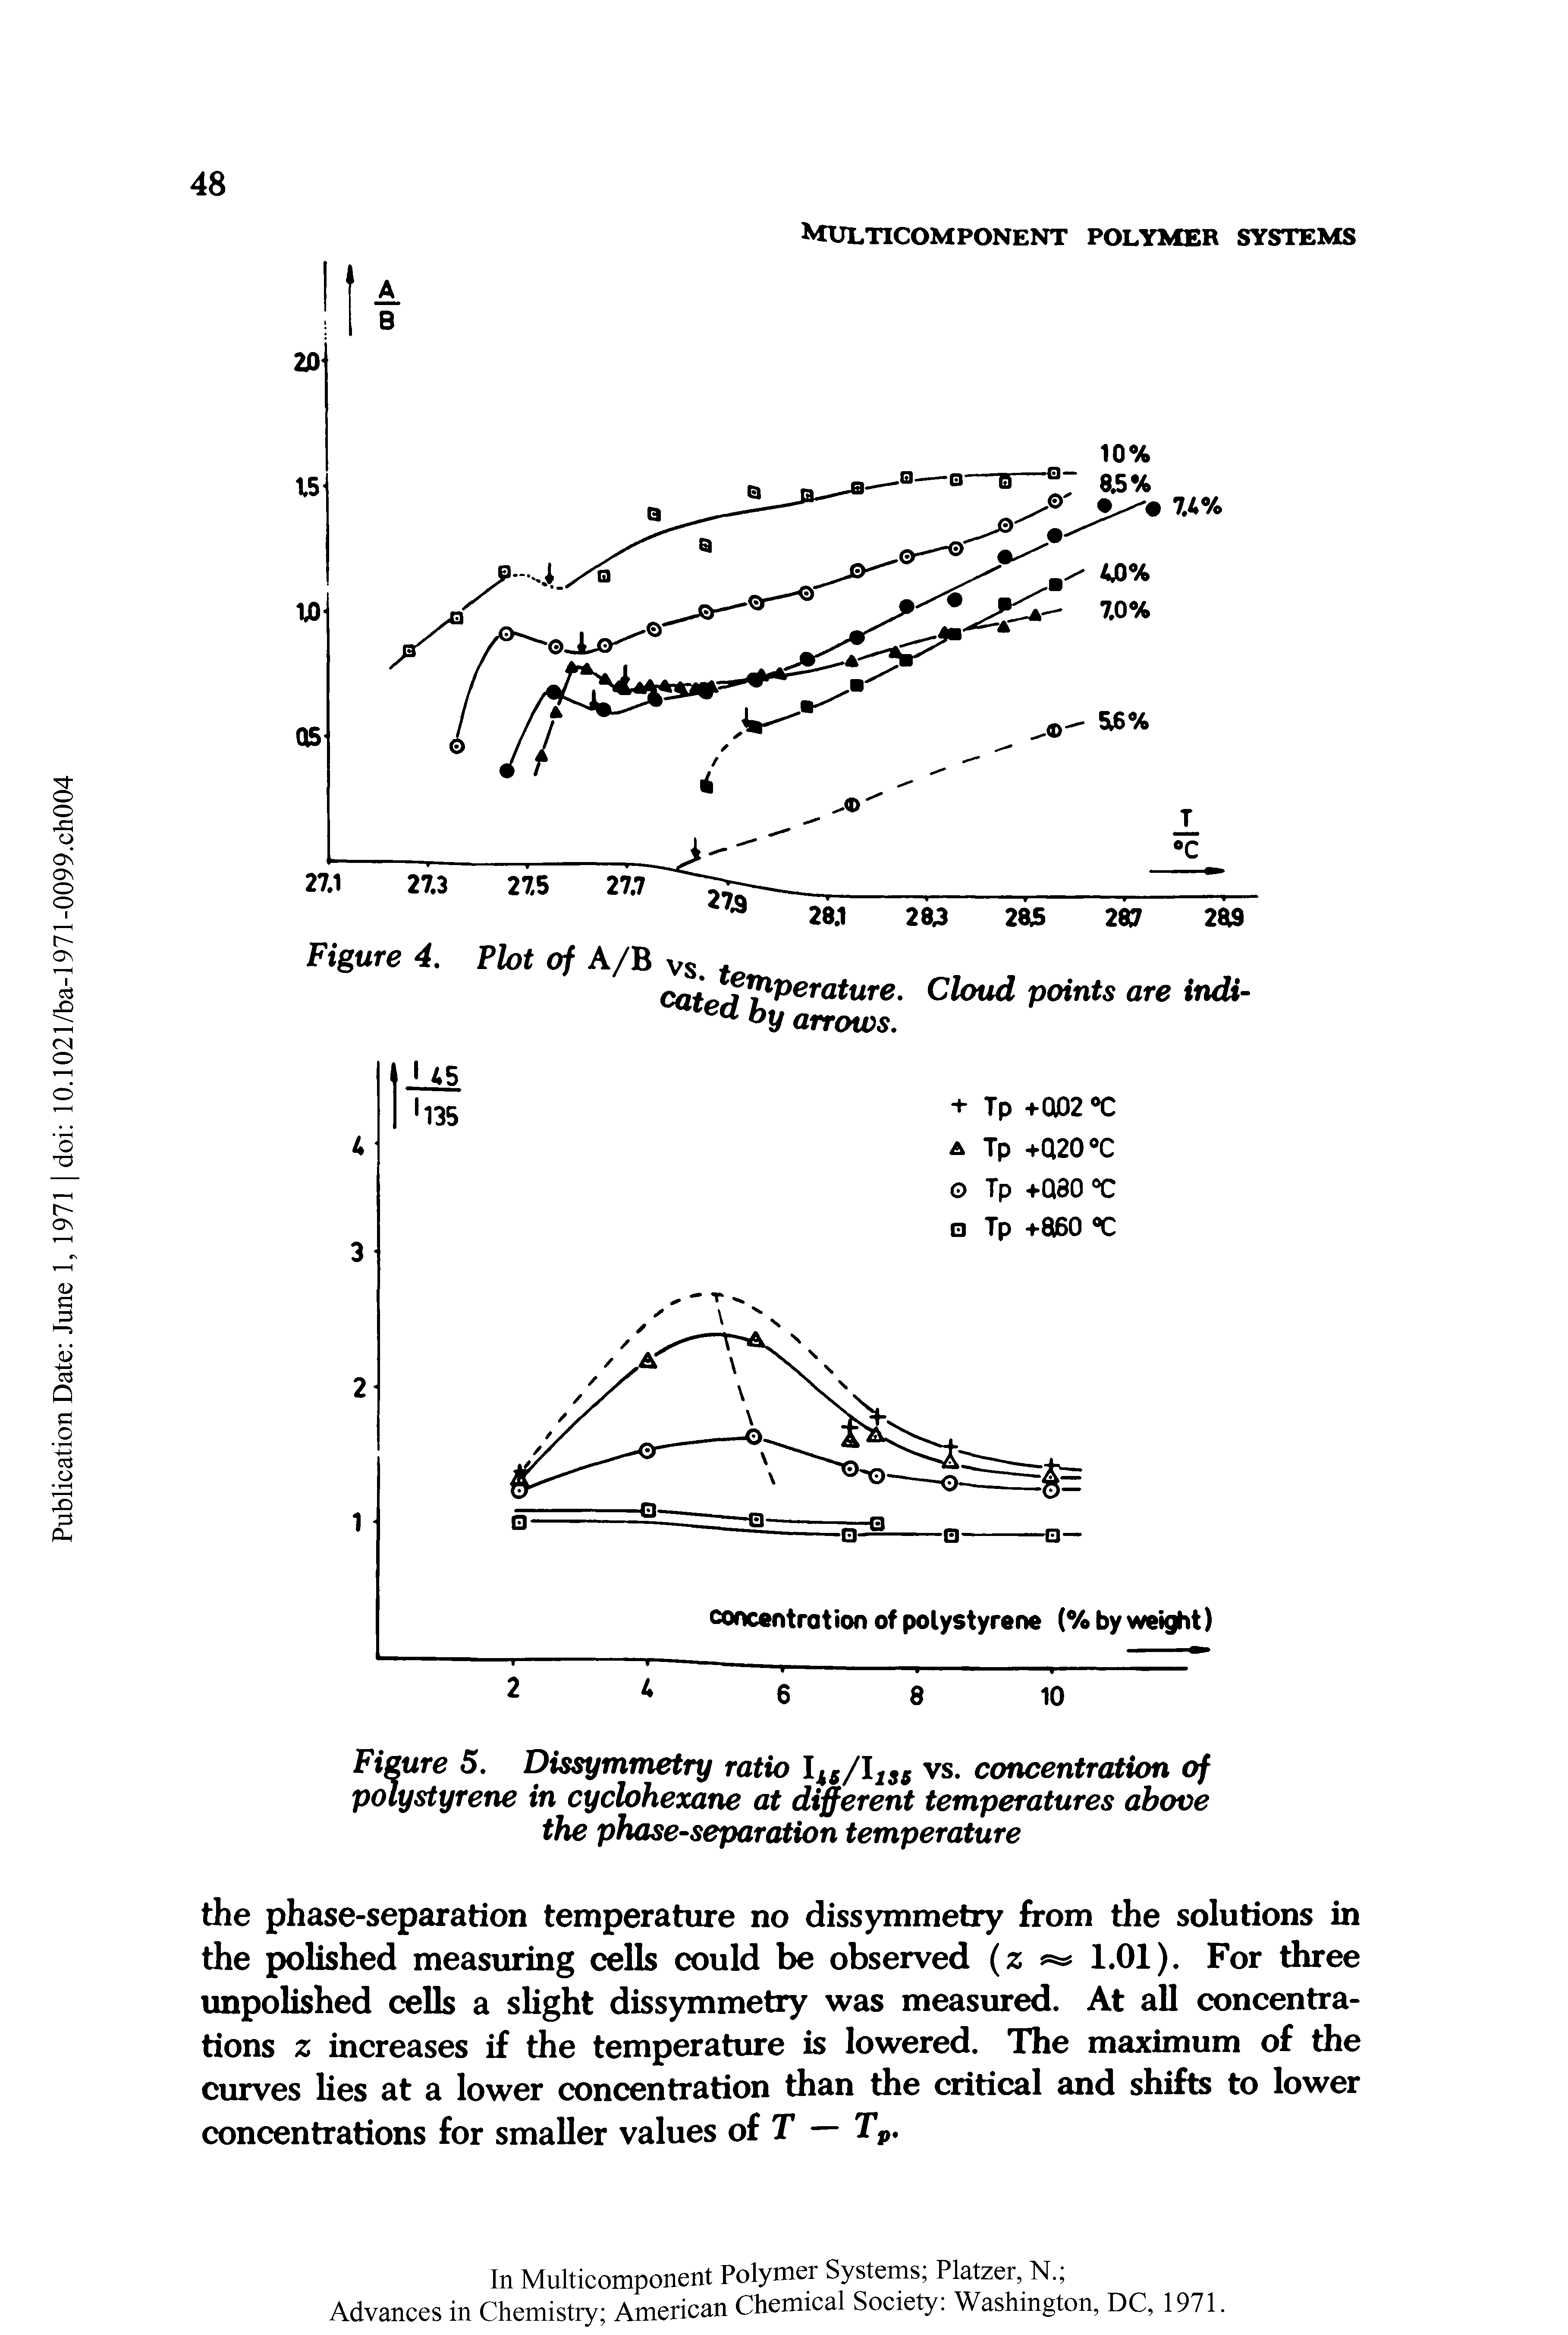 Figure 5. Dissymmetry ratio IiS/I1S5 vs. concentration of polystyrene in cyclohexane at different temperatures above the phase-separation temperature...